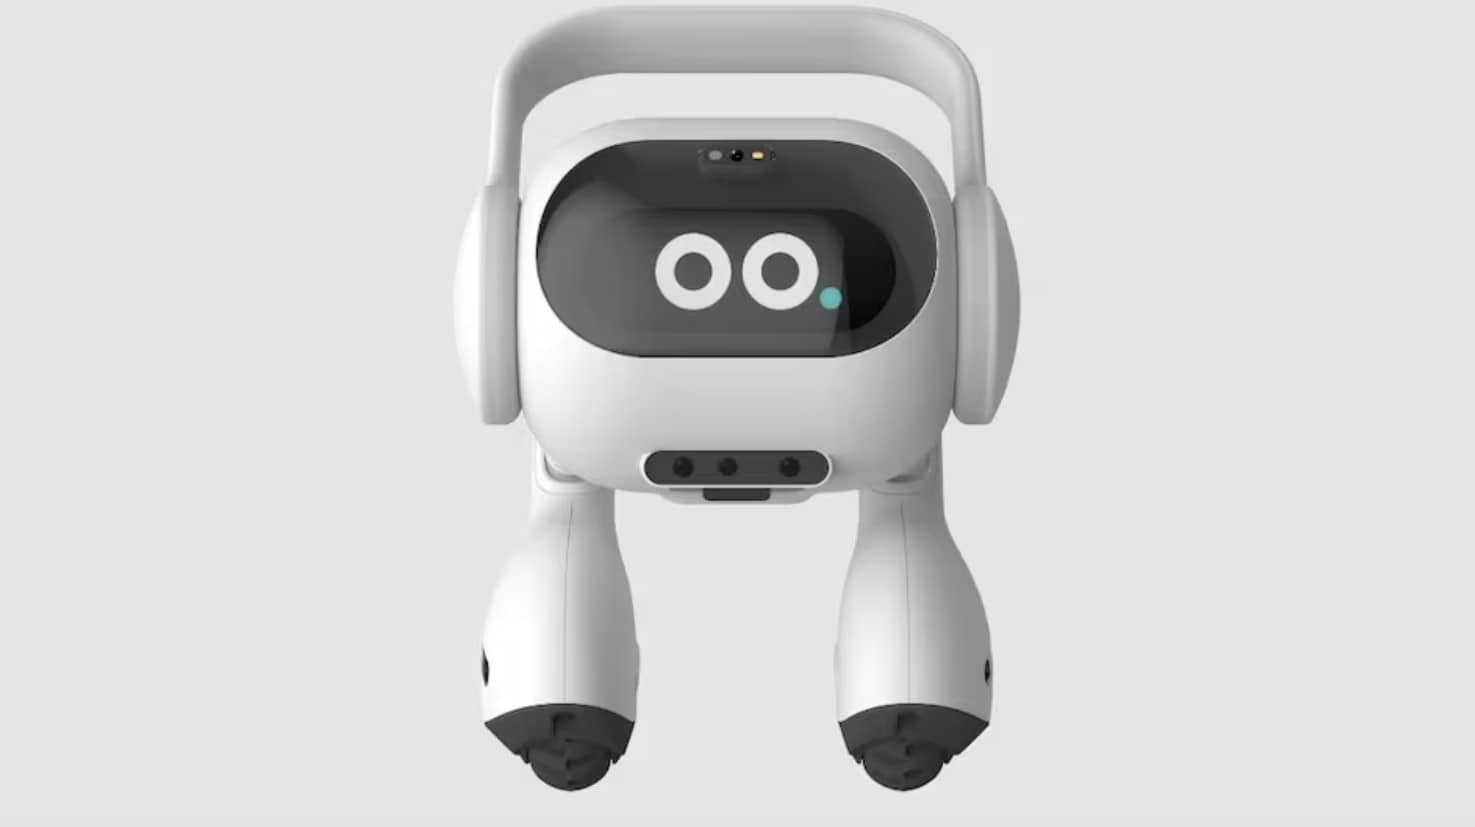 LG Set to Launch an AI Robot Capable of Monitoring Your Pets